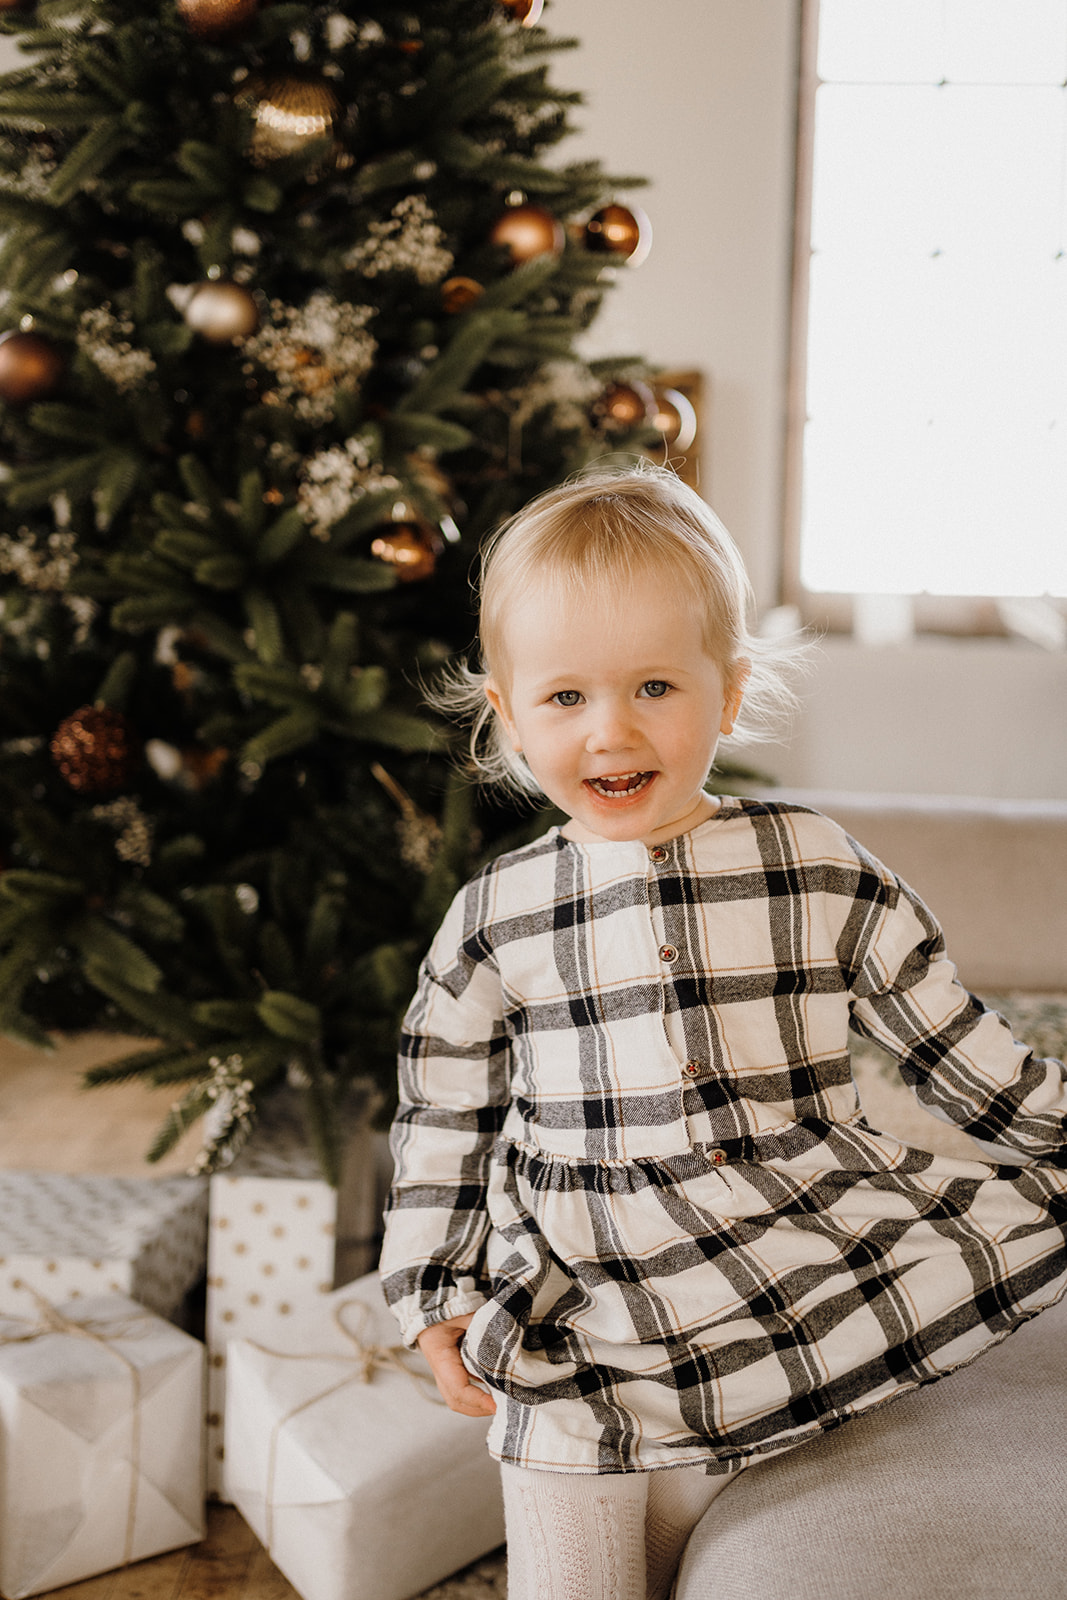 A toddler standing in front of a Christmas Tree.